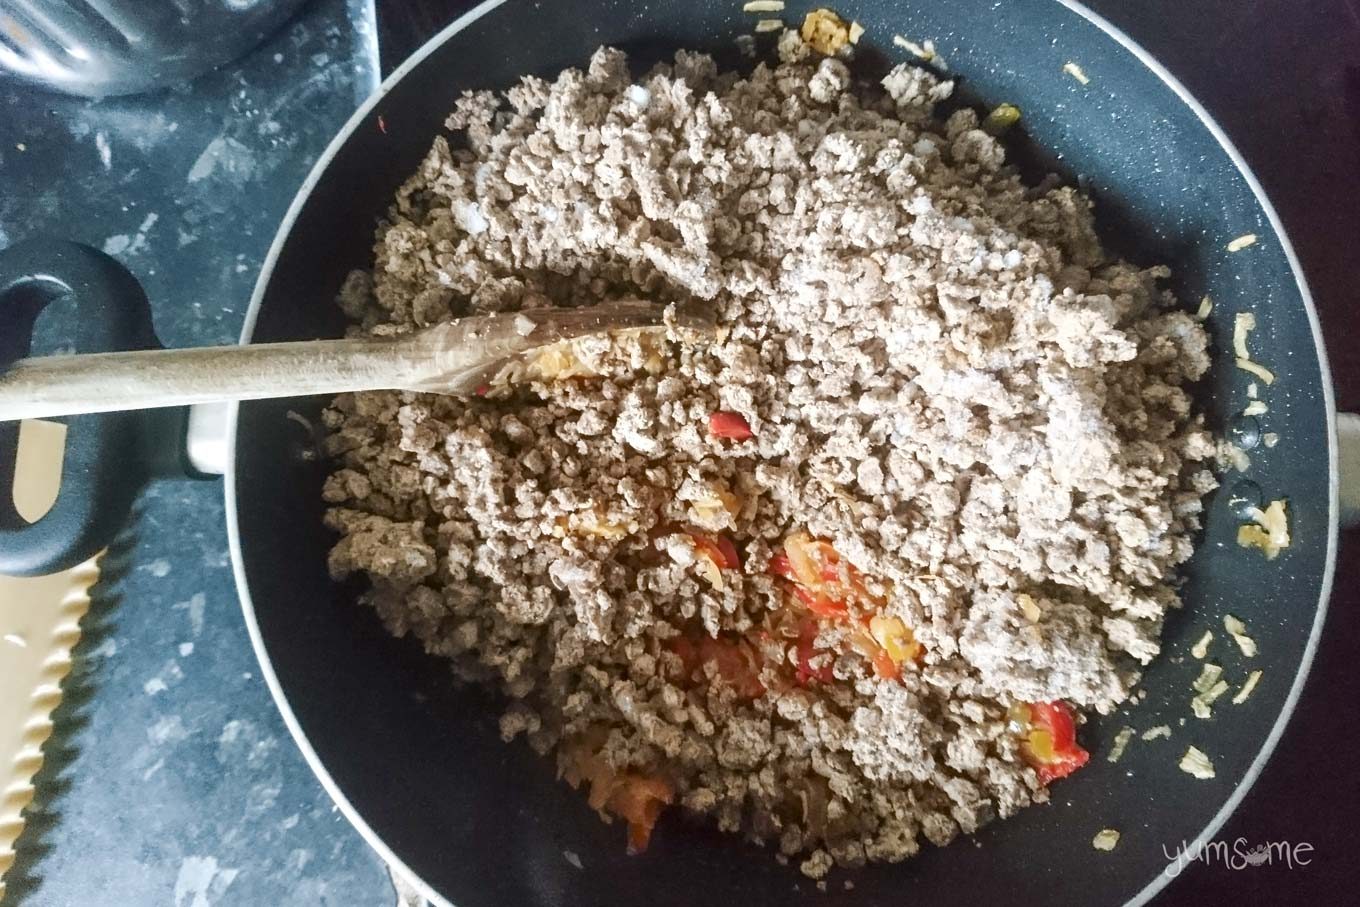 Veggie mince added to the peppers and onions.